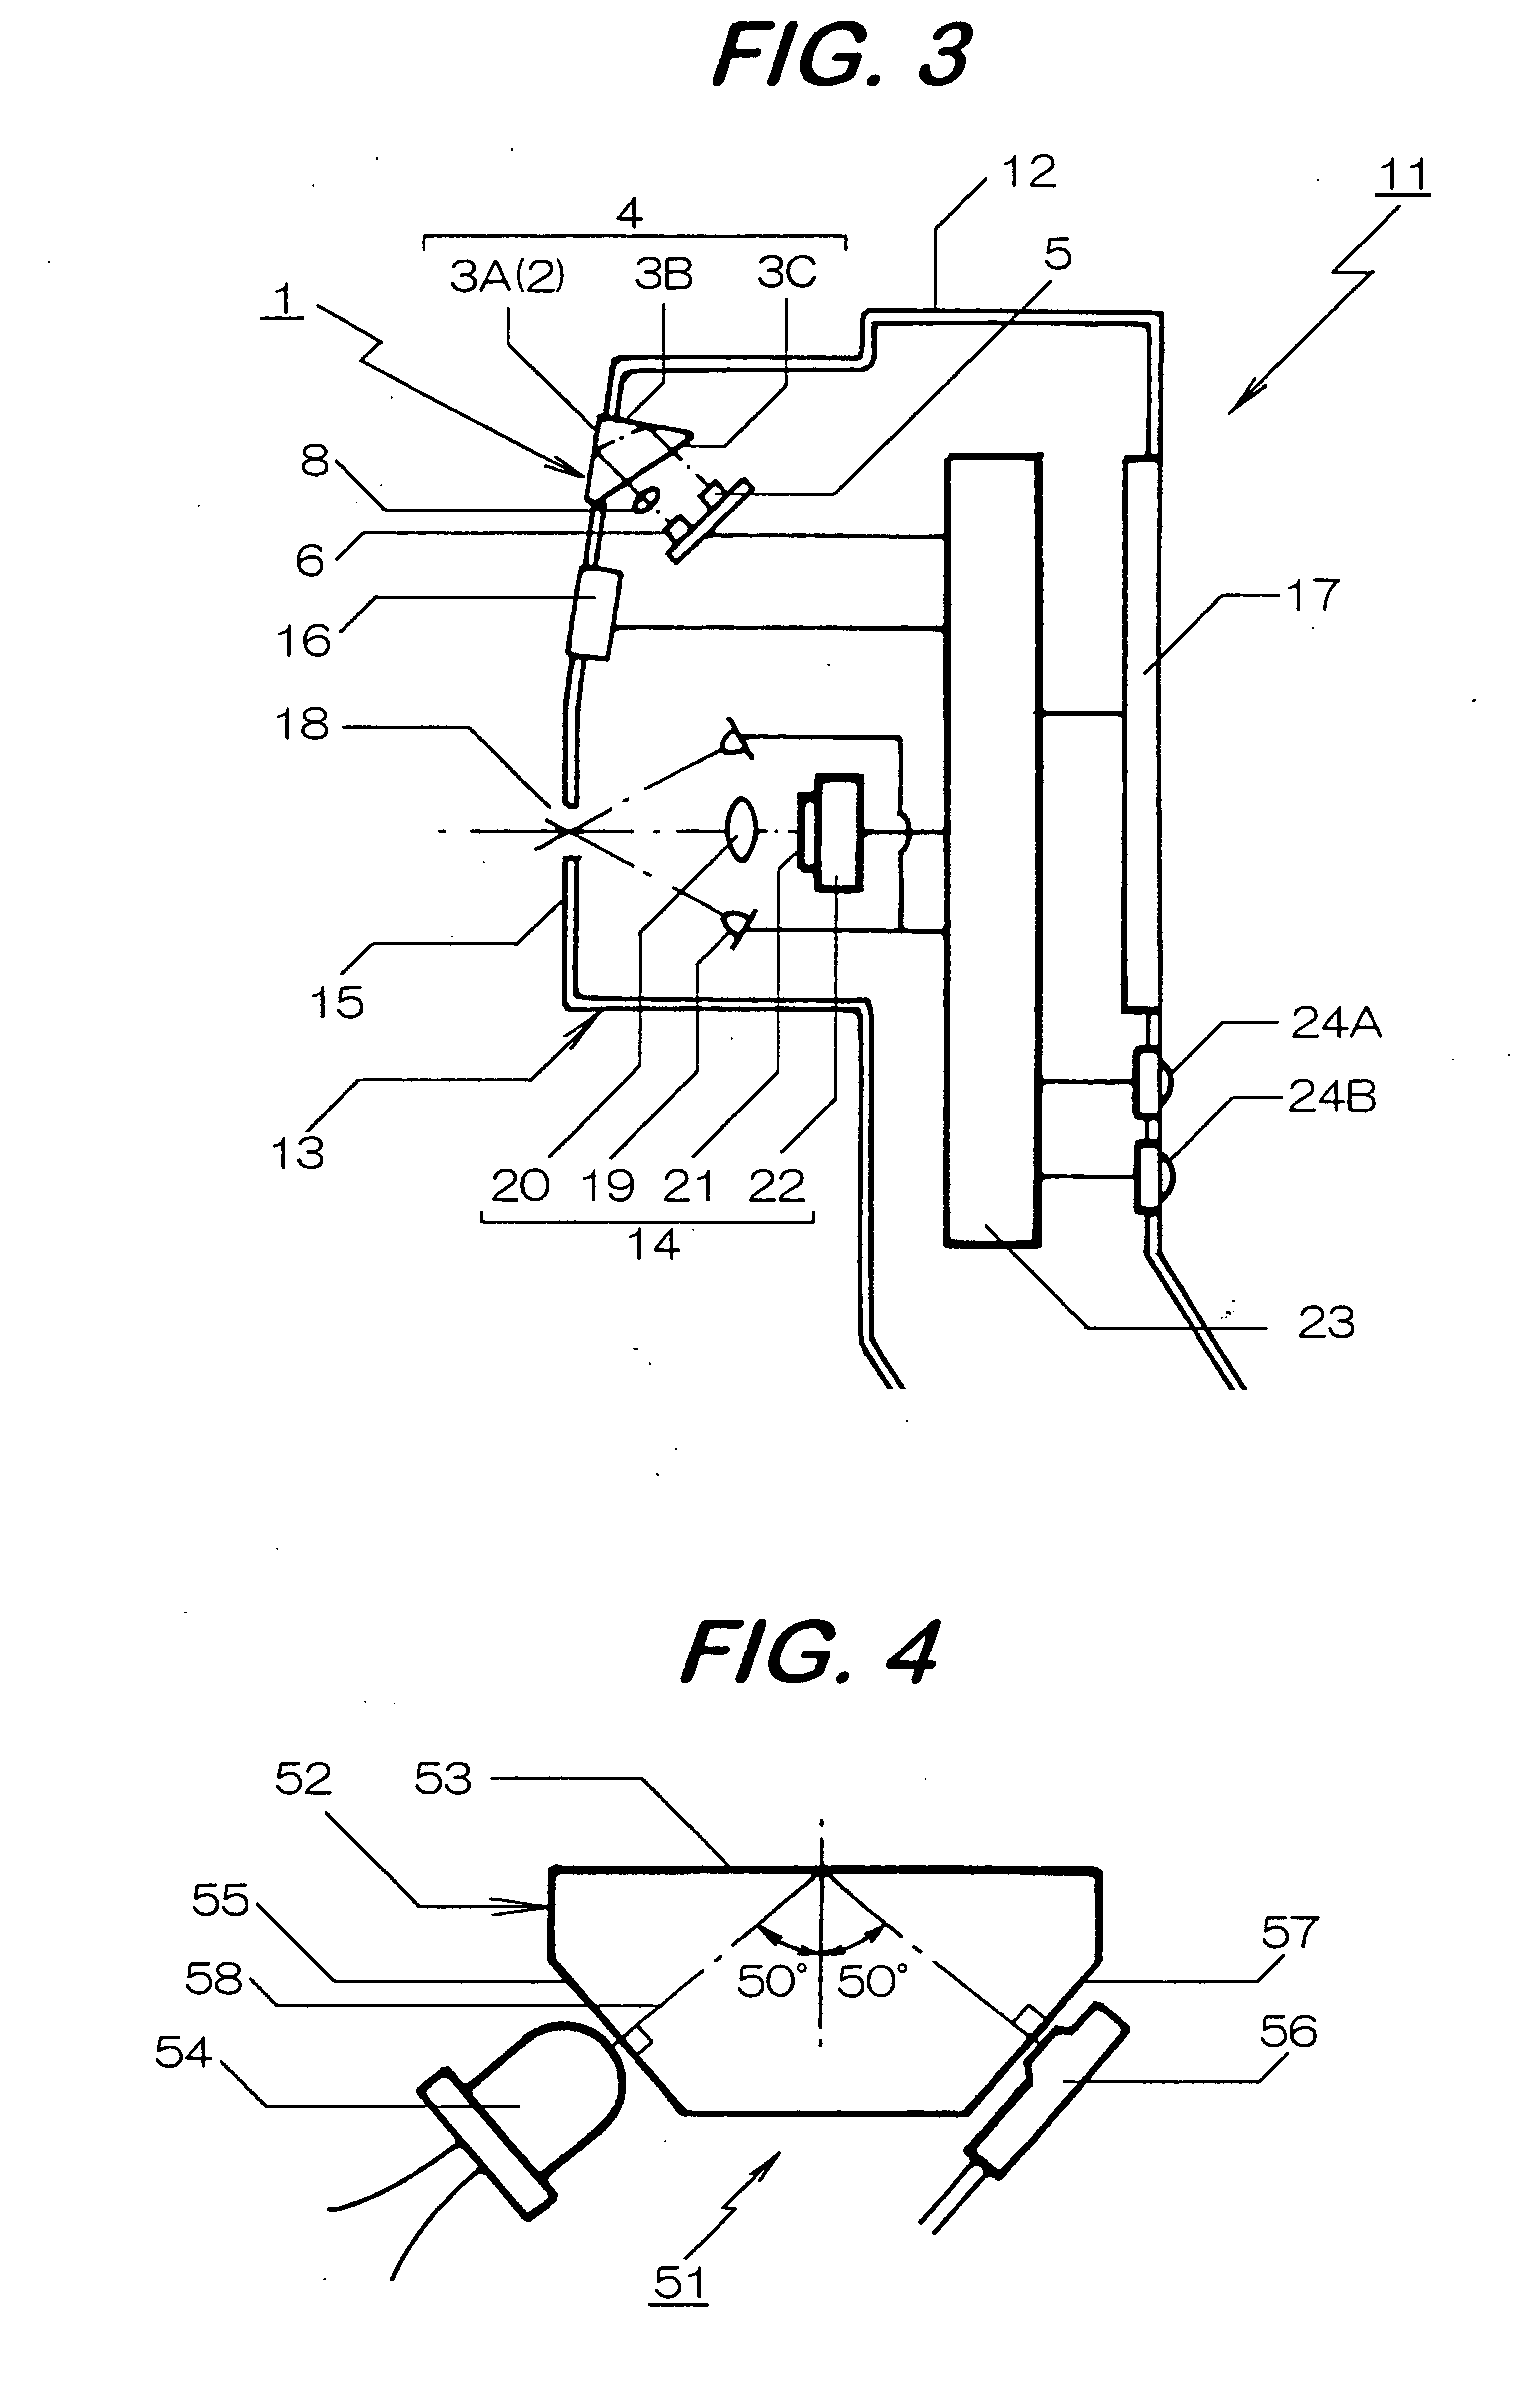 Skin condition observation apparatus